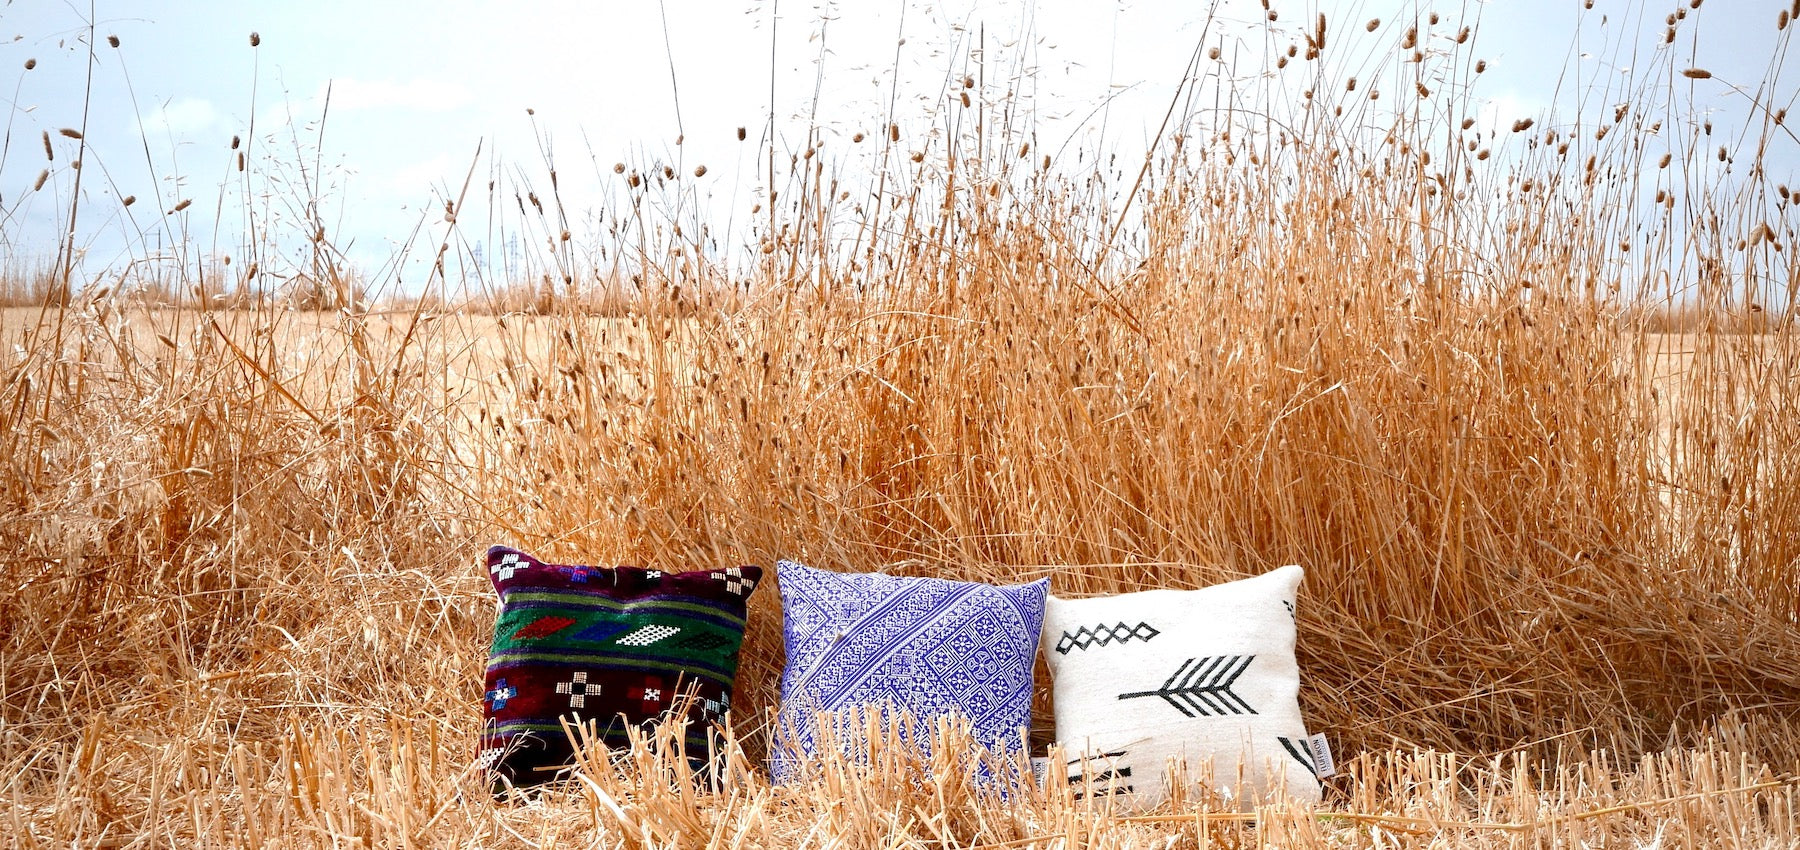 Three square pillows with traditional Moroccan patterns on a hay field.